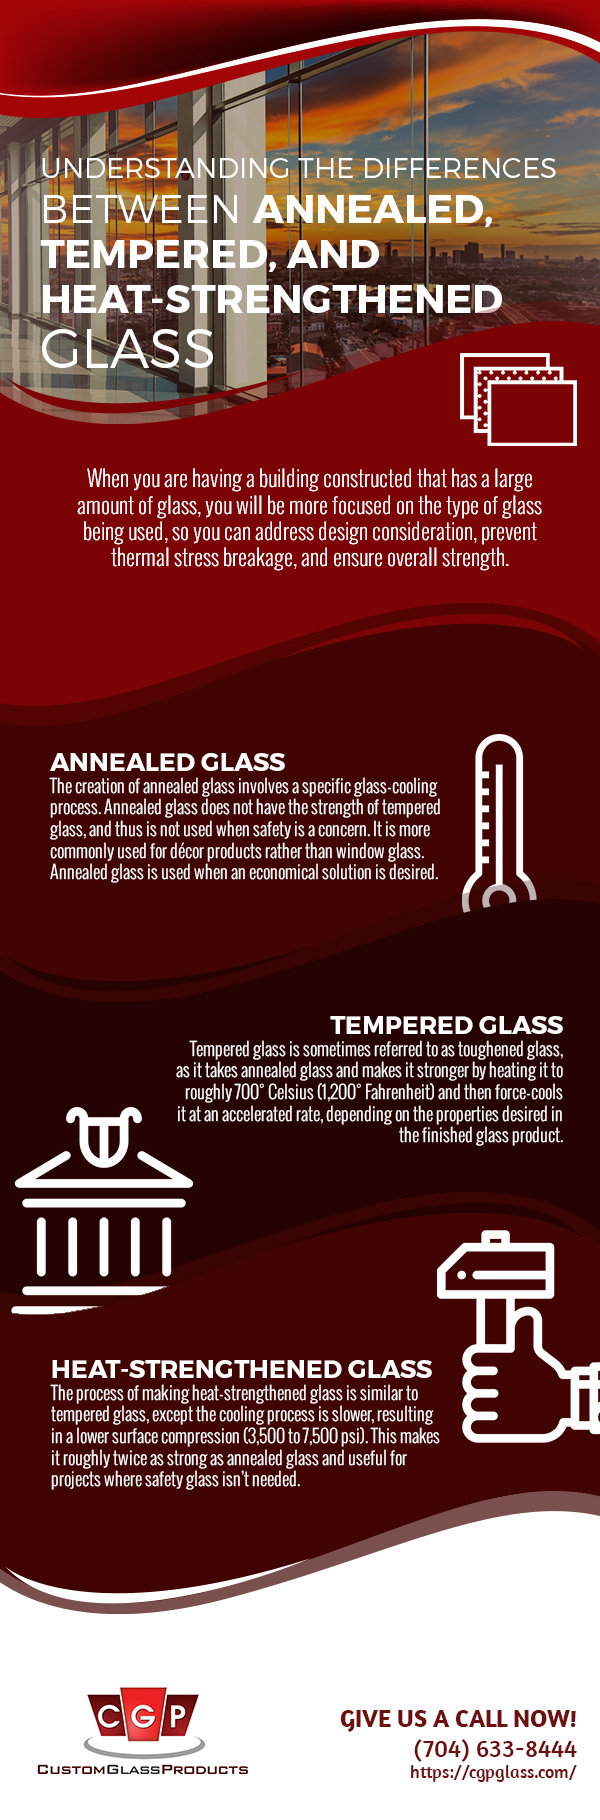 Understanding the Differences Between Annealed, Tempered, and Heat-Strengthened Glass